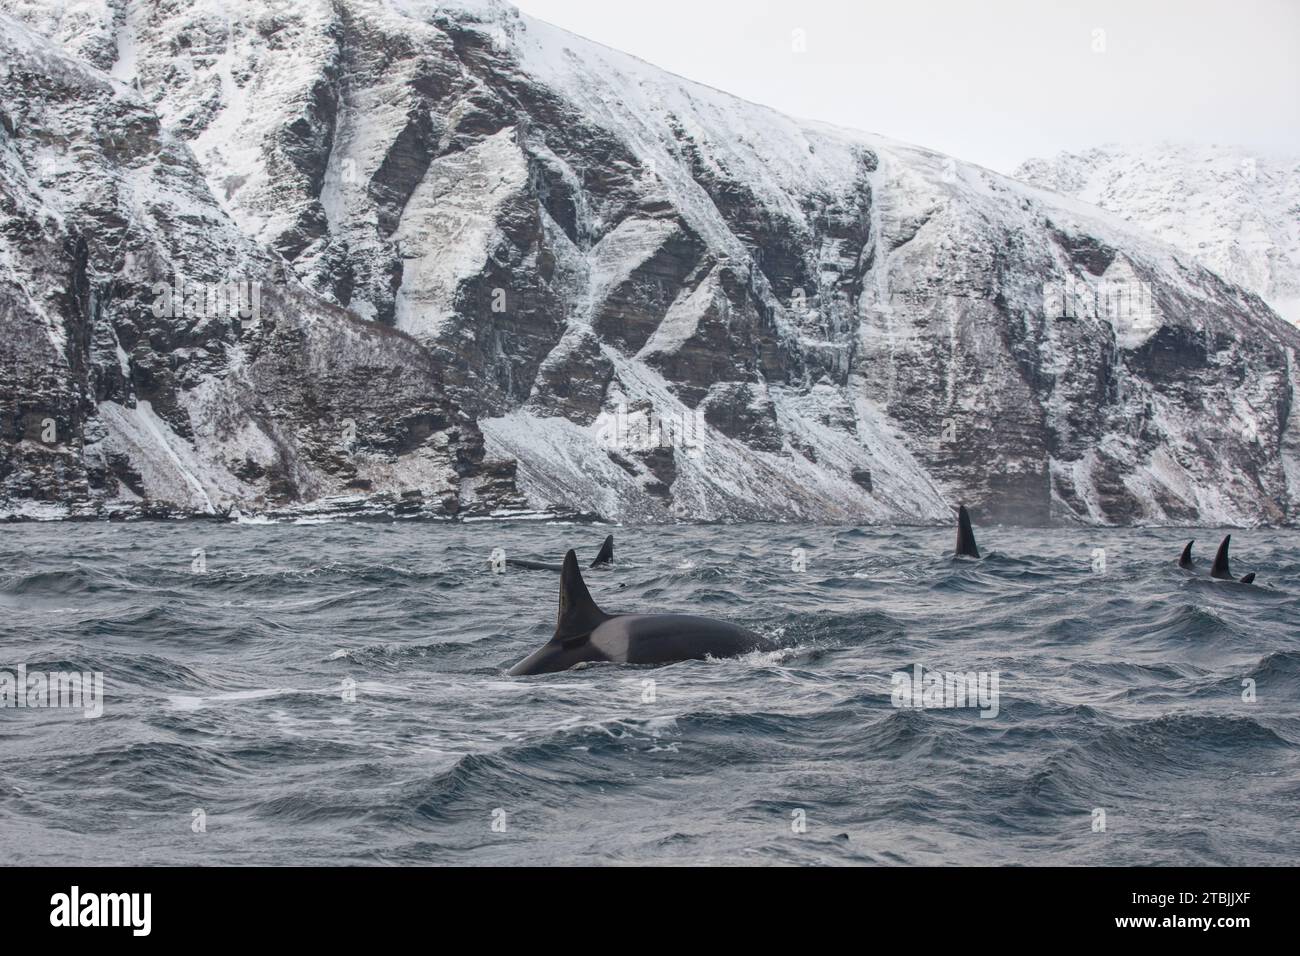 Orca (killer whale) swimming in the cold waters on Tromso, Norway. Stock Photo